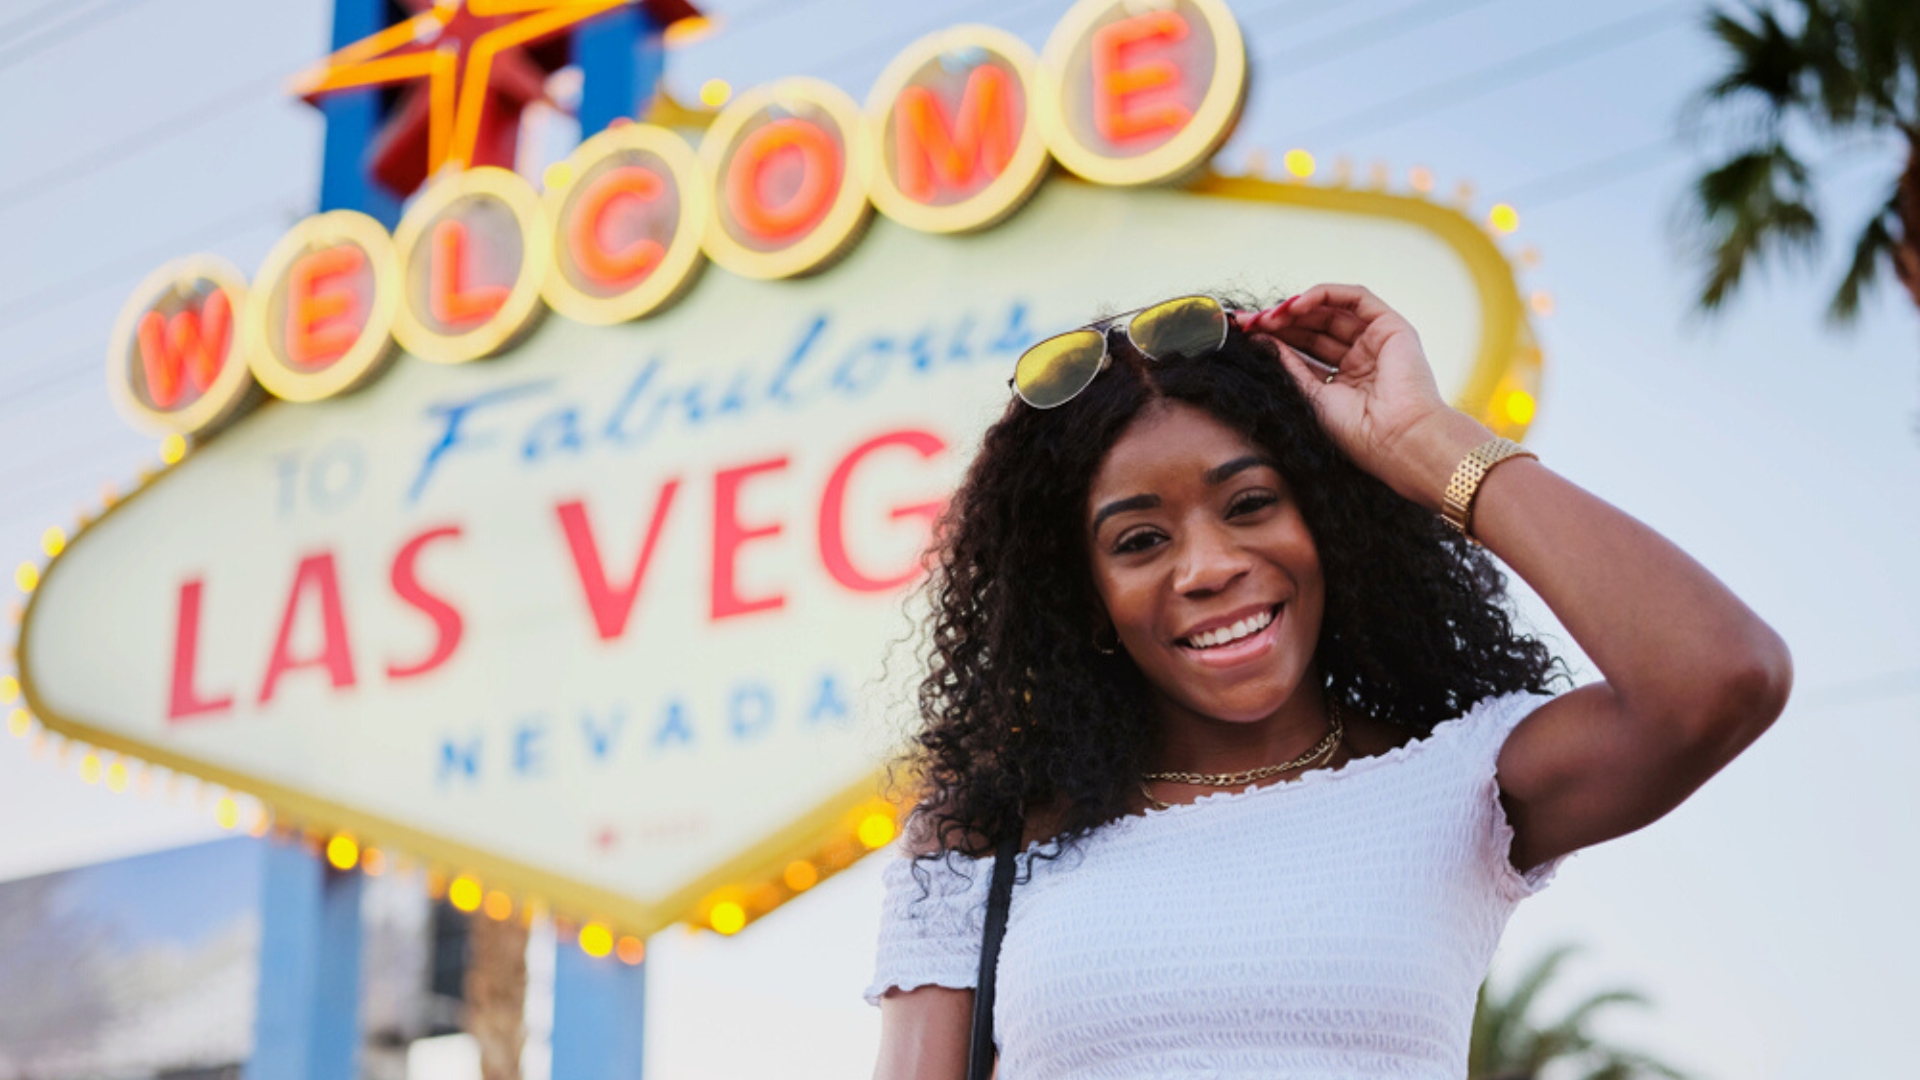 [JADE] Our Top Free Attractions in Las Vegas to Add to Your Itinerary